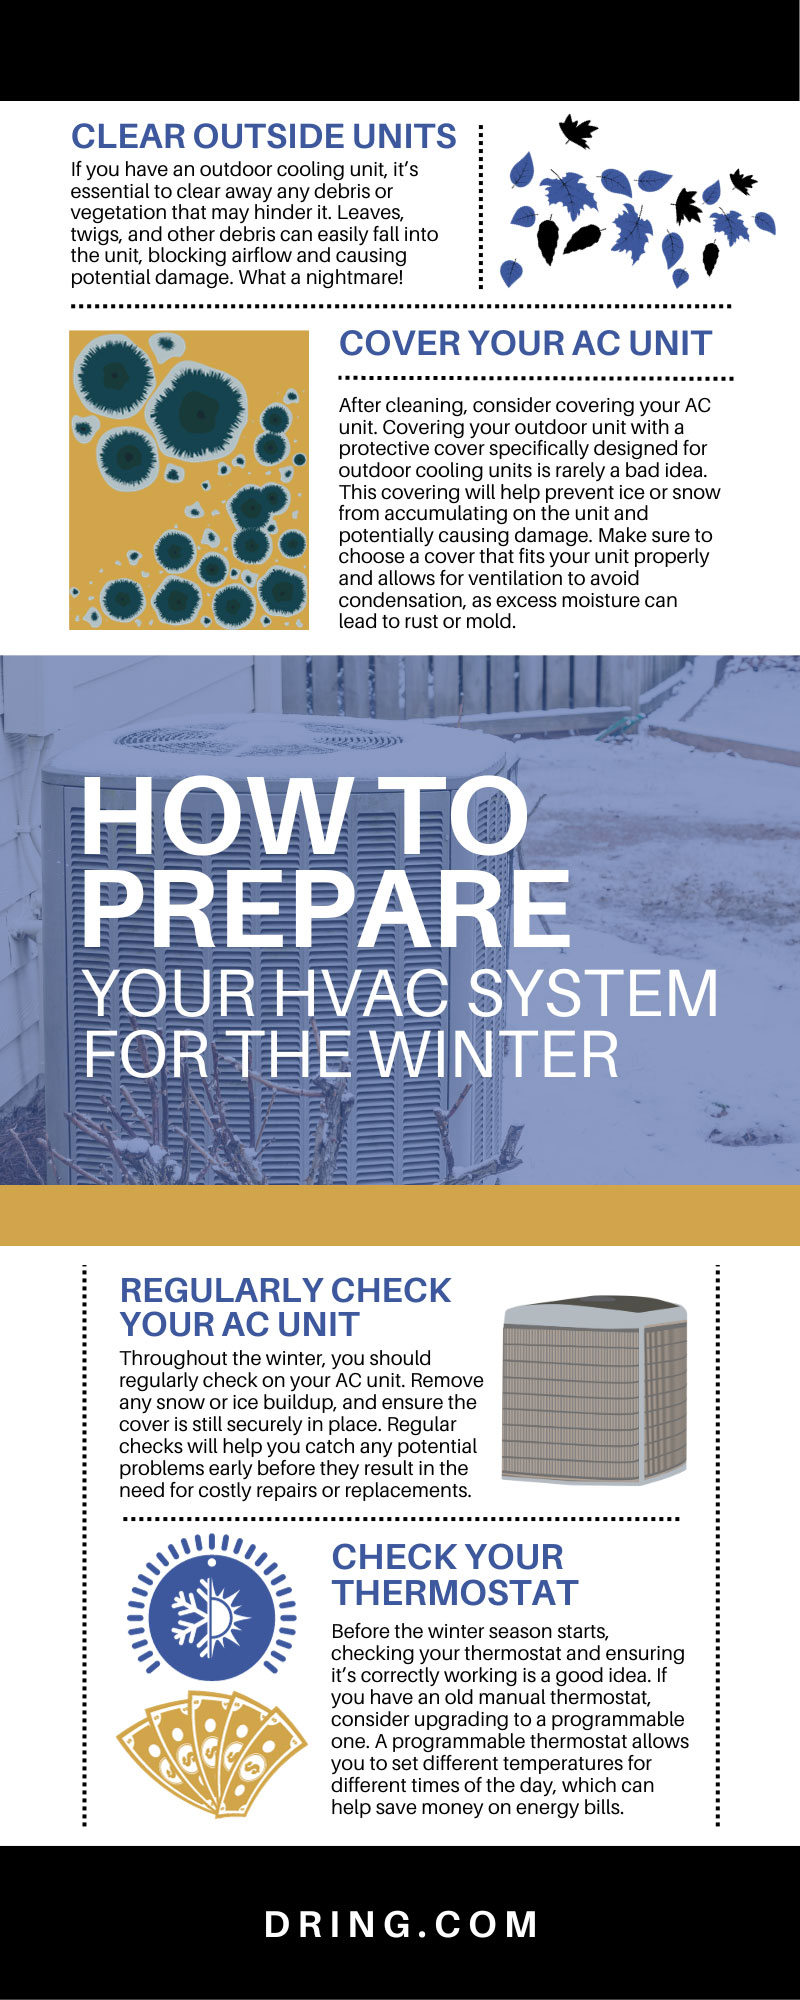 How To Prepare Your HVAC System for the Winter